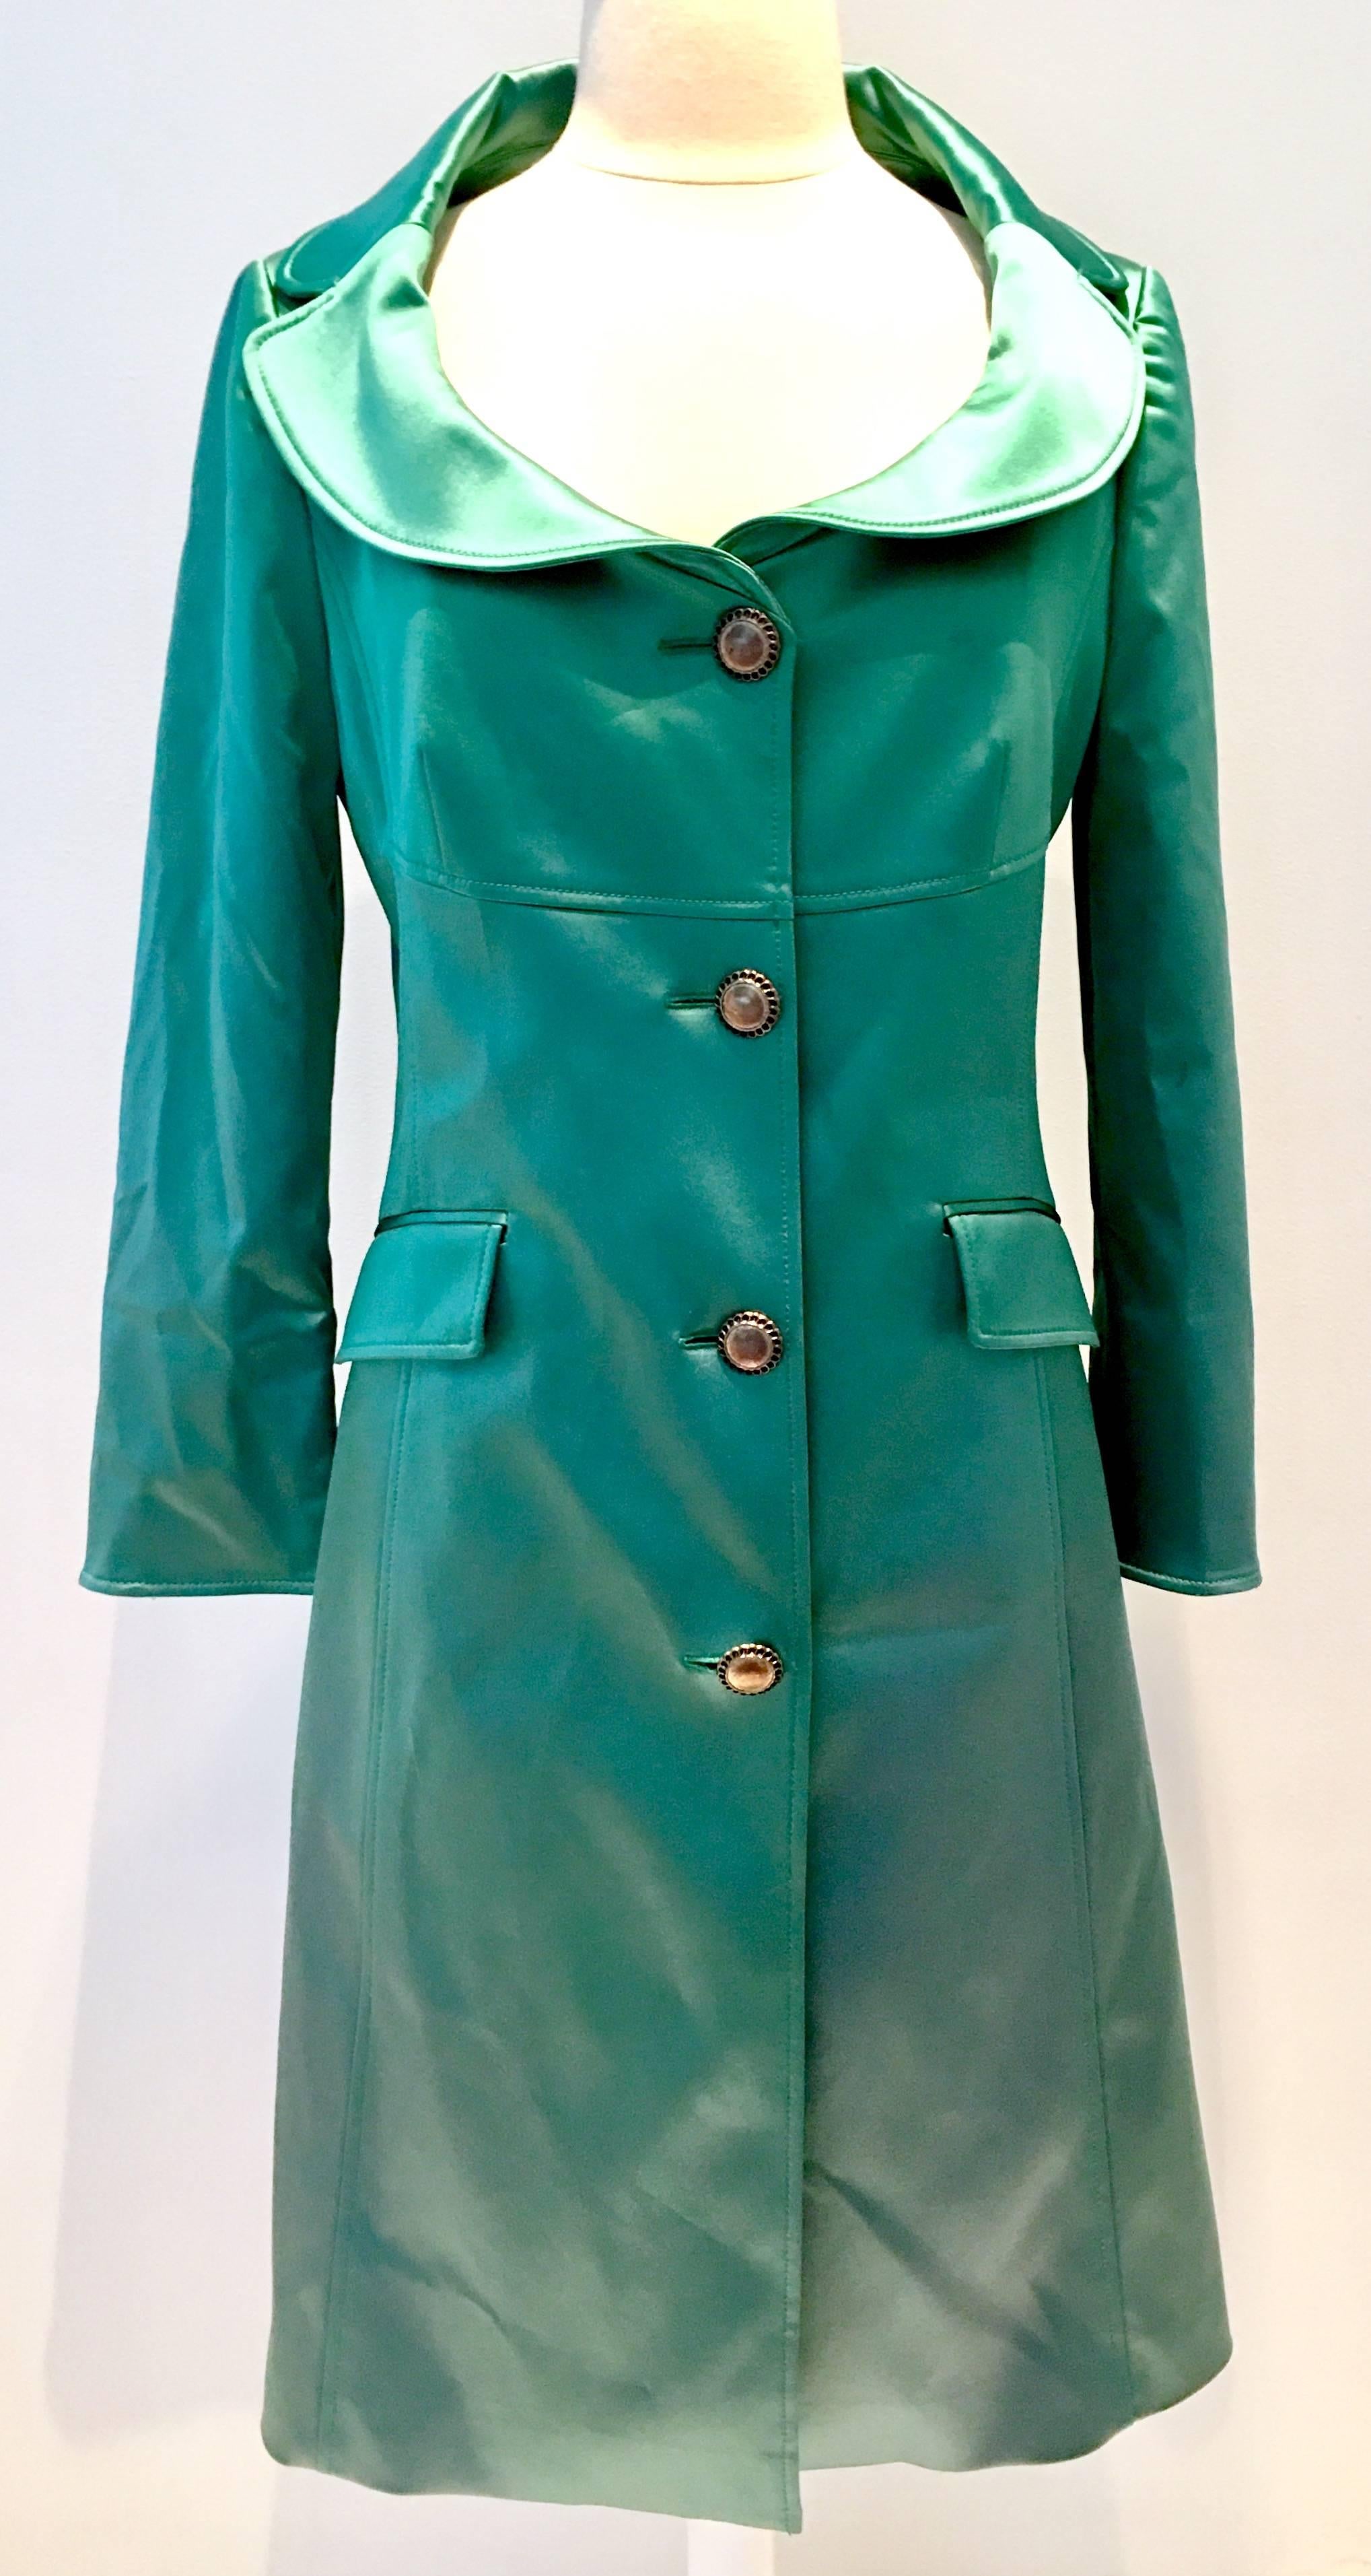 2013 Italian green satin top stitch and brass button Dolce & Gabbana satin evening jacket. This lovely piece is from the 